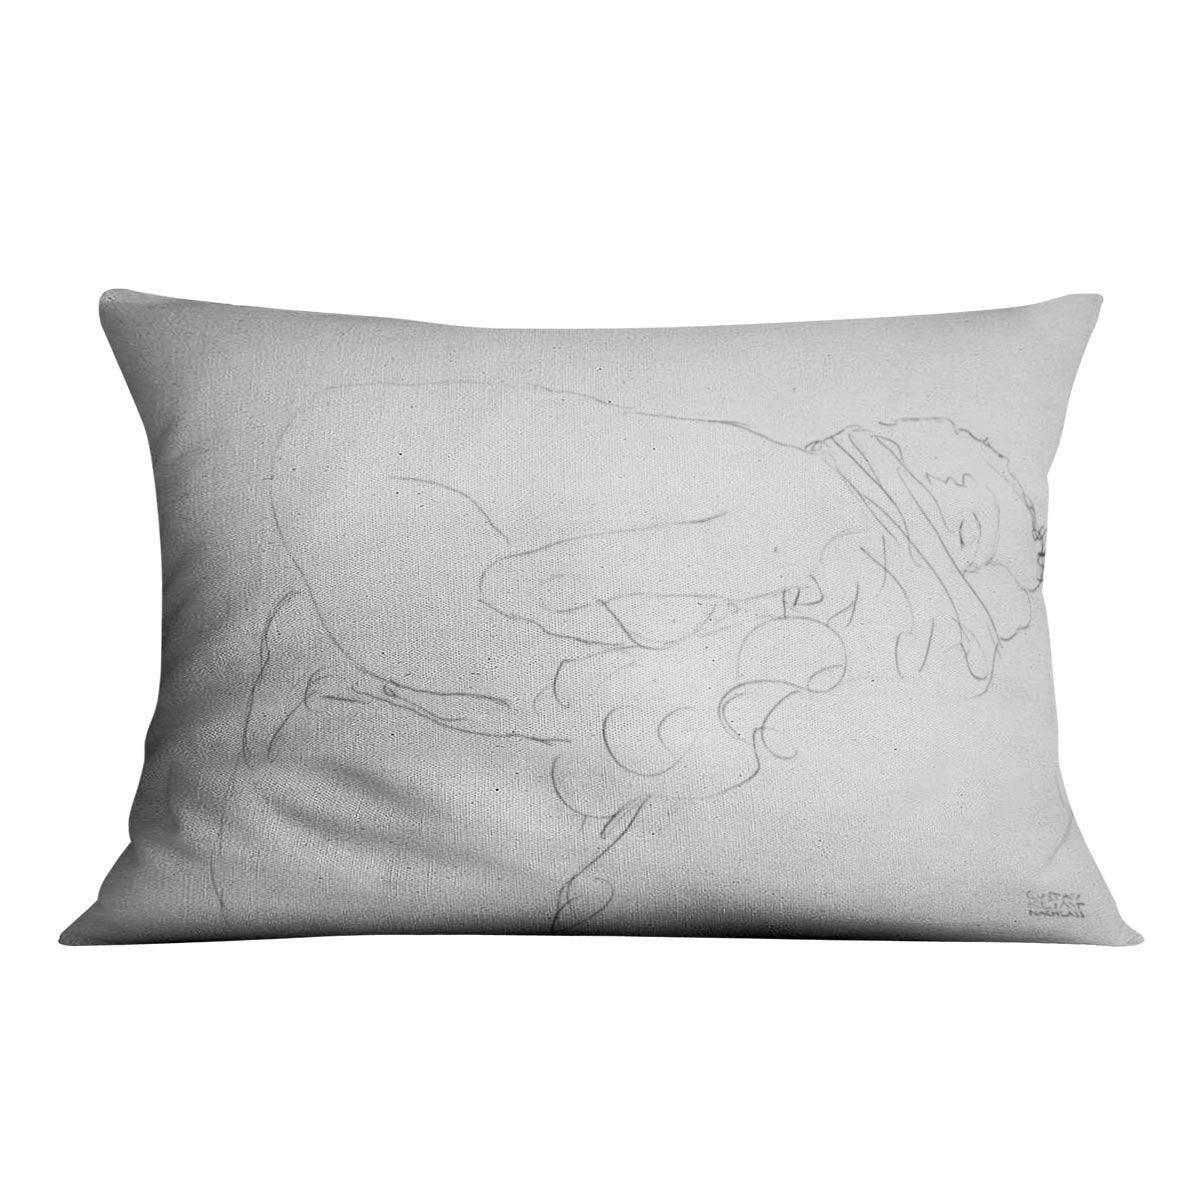 Crouching to right by Klimt Throw Pillow